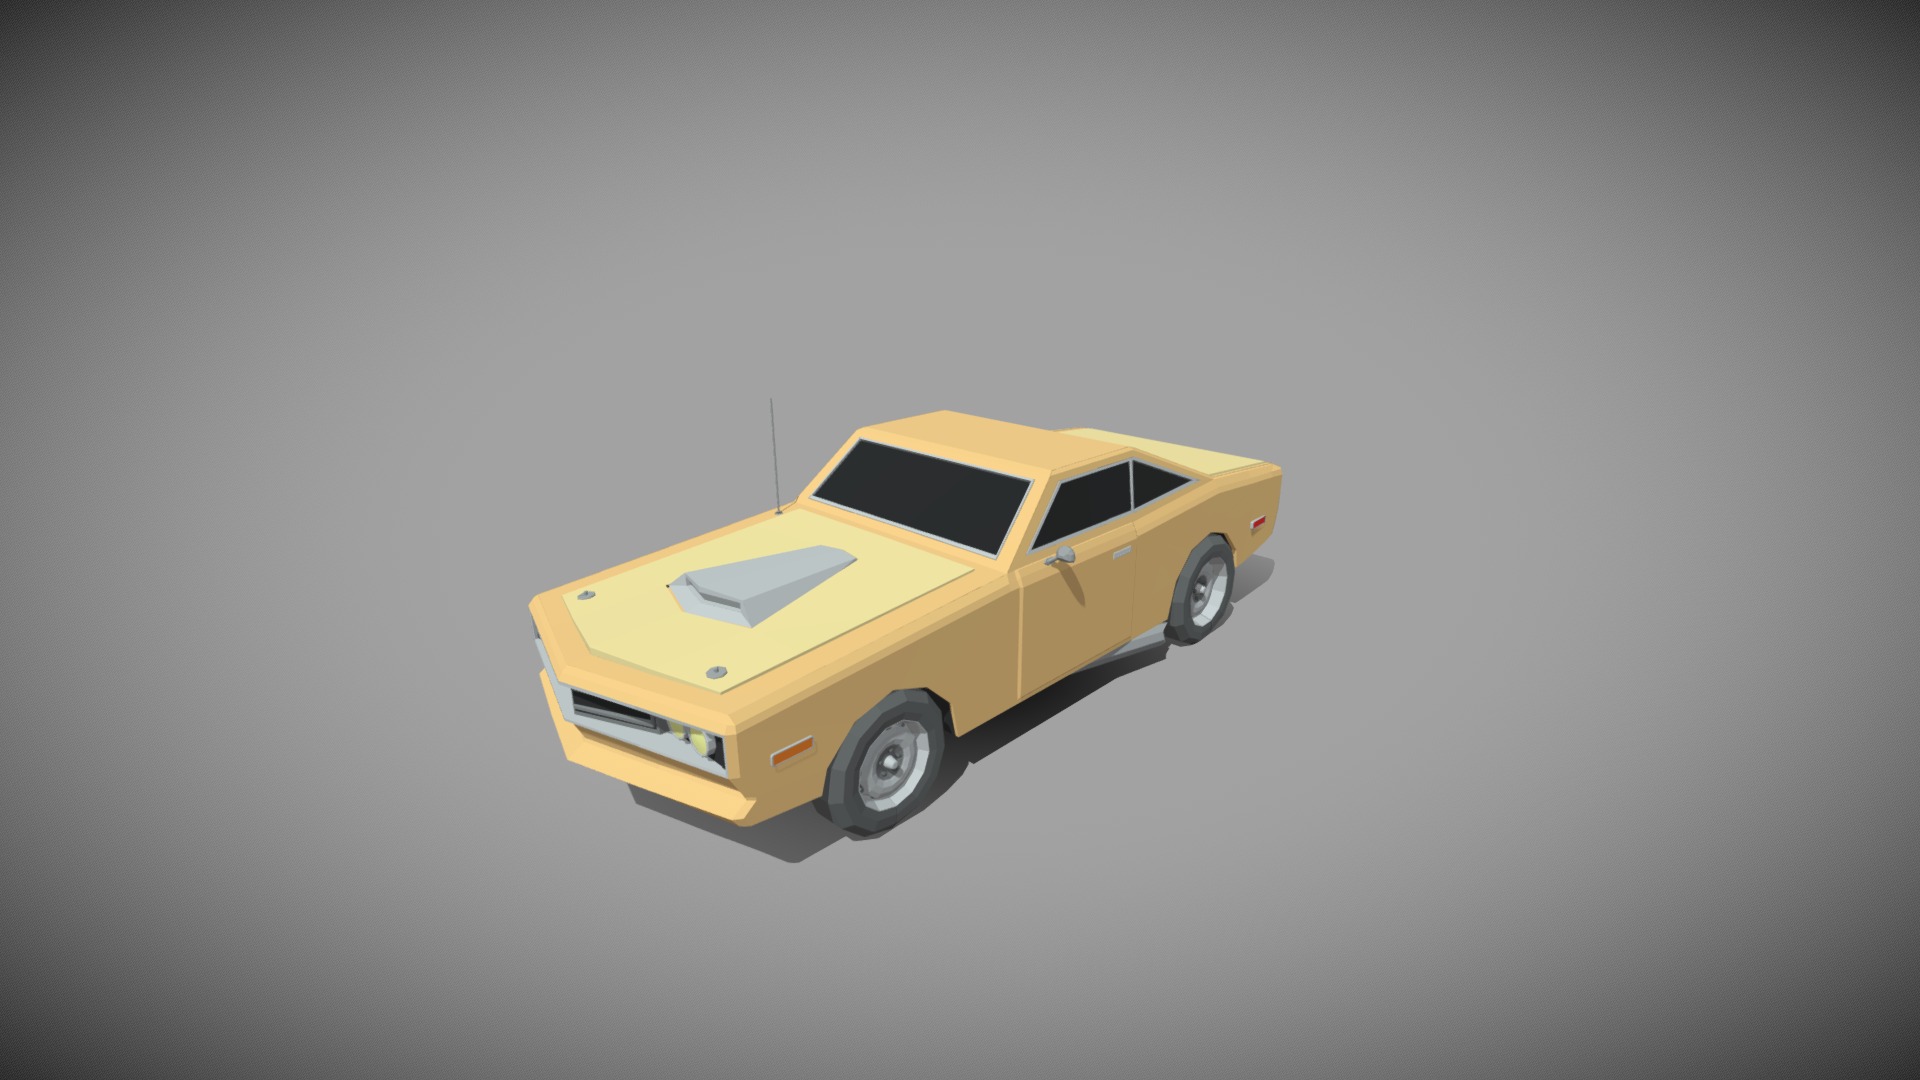 3D model Tan_Muscle_Car_Preview - This is a 3D model of the Tan_Muscle_Car_Preview. The 3D model is about a yellow car on a grey background.